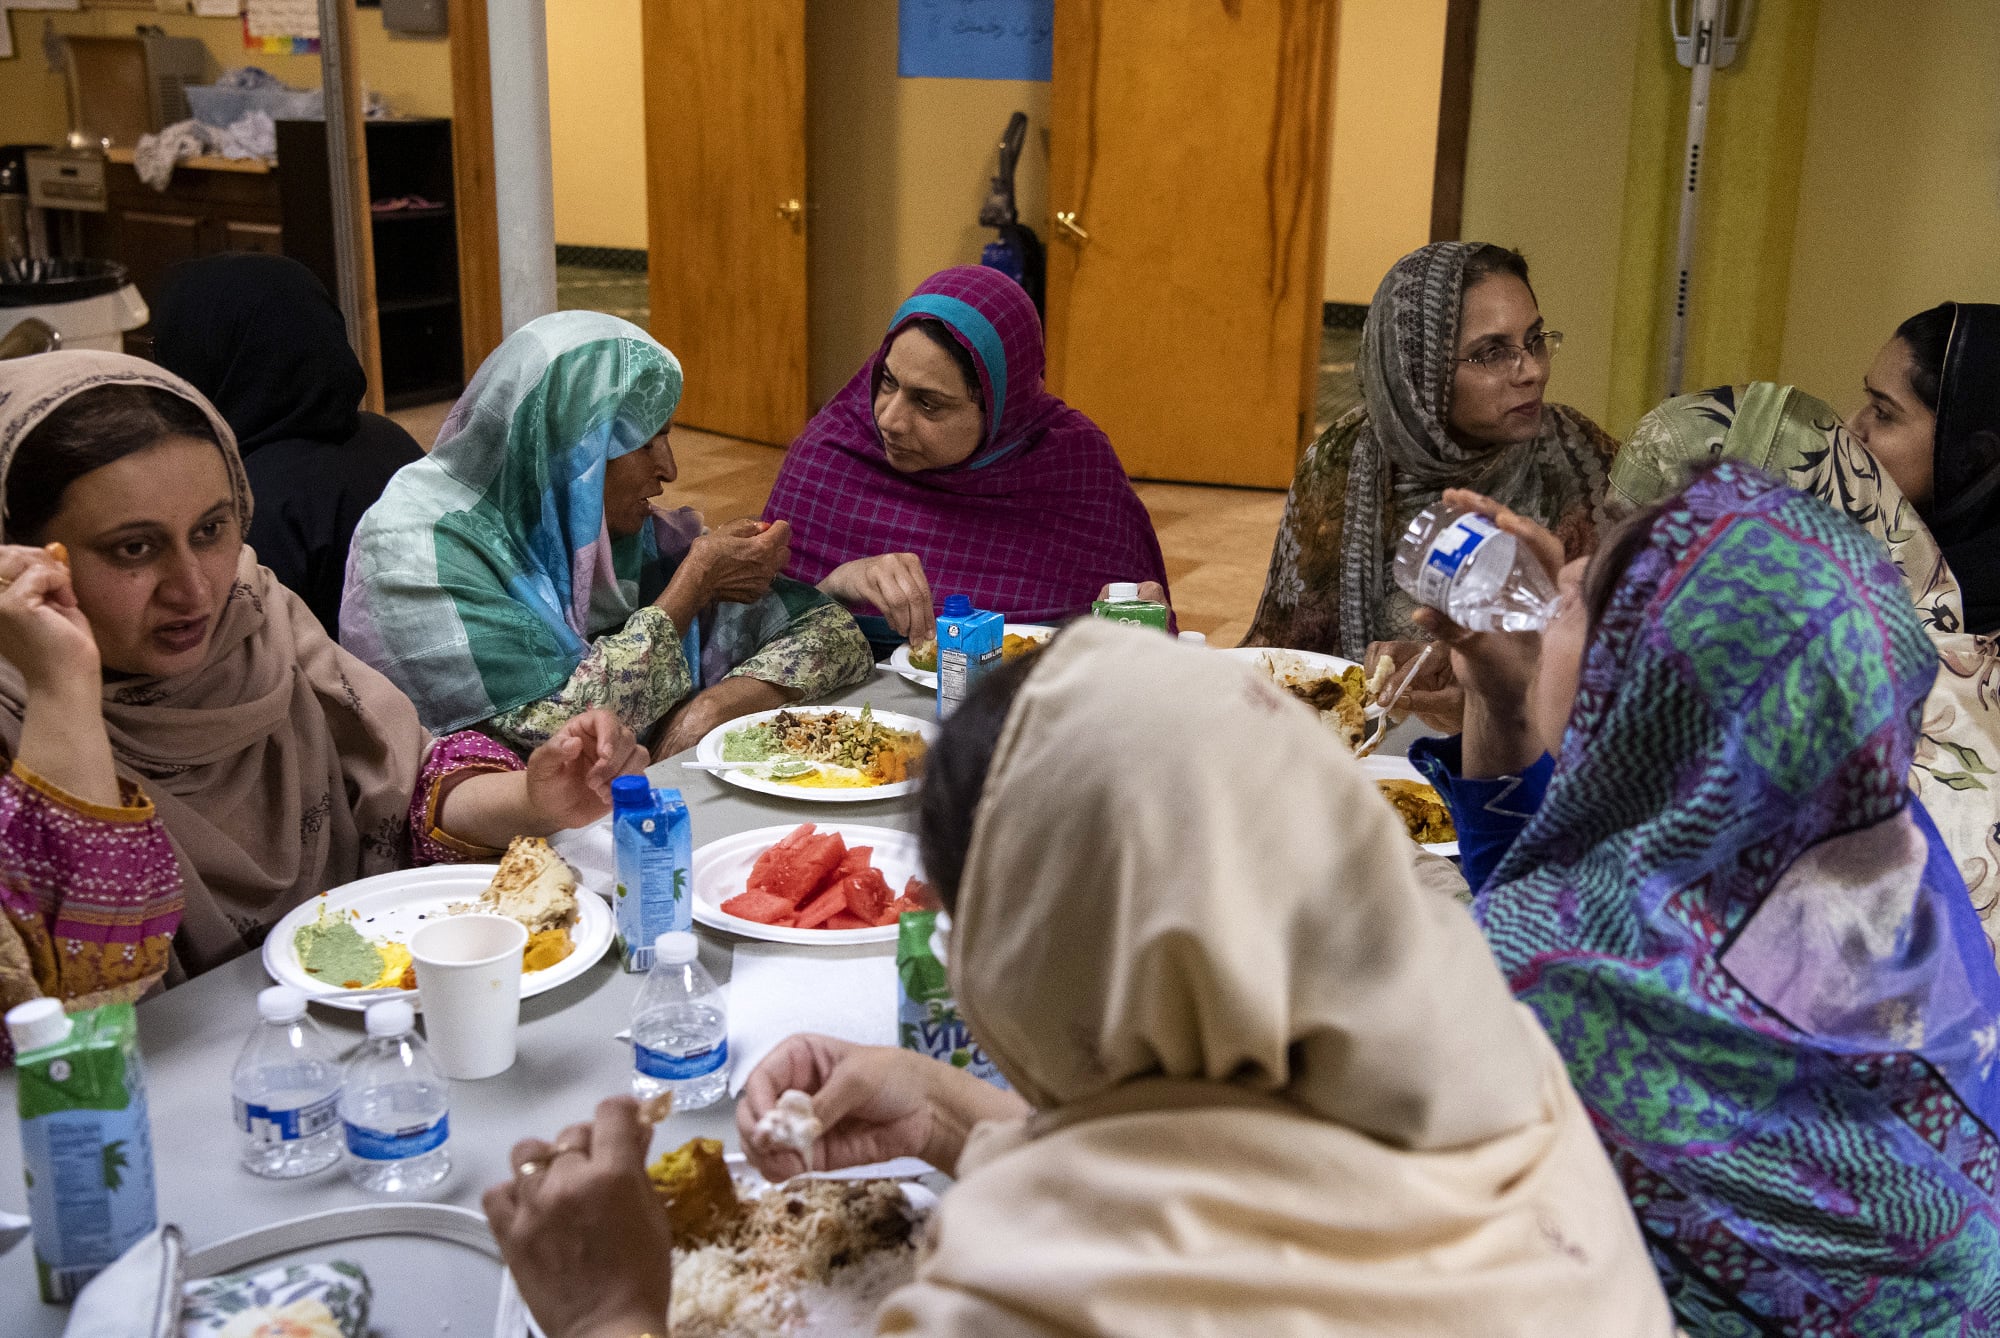 A group of women come together to enjoy their evening meal after sunset during the first week of Ramadan at the Islamic Society of Southwest Washington on Friday, May 10, 2019.